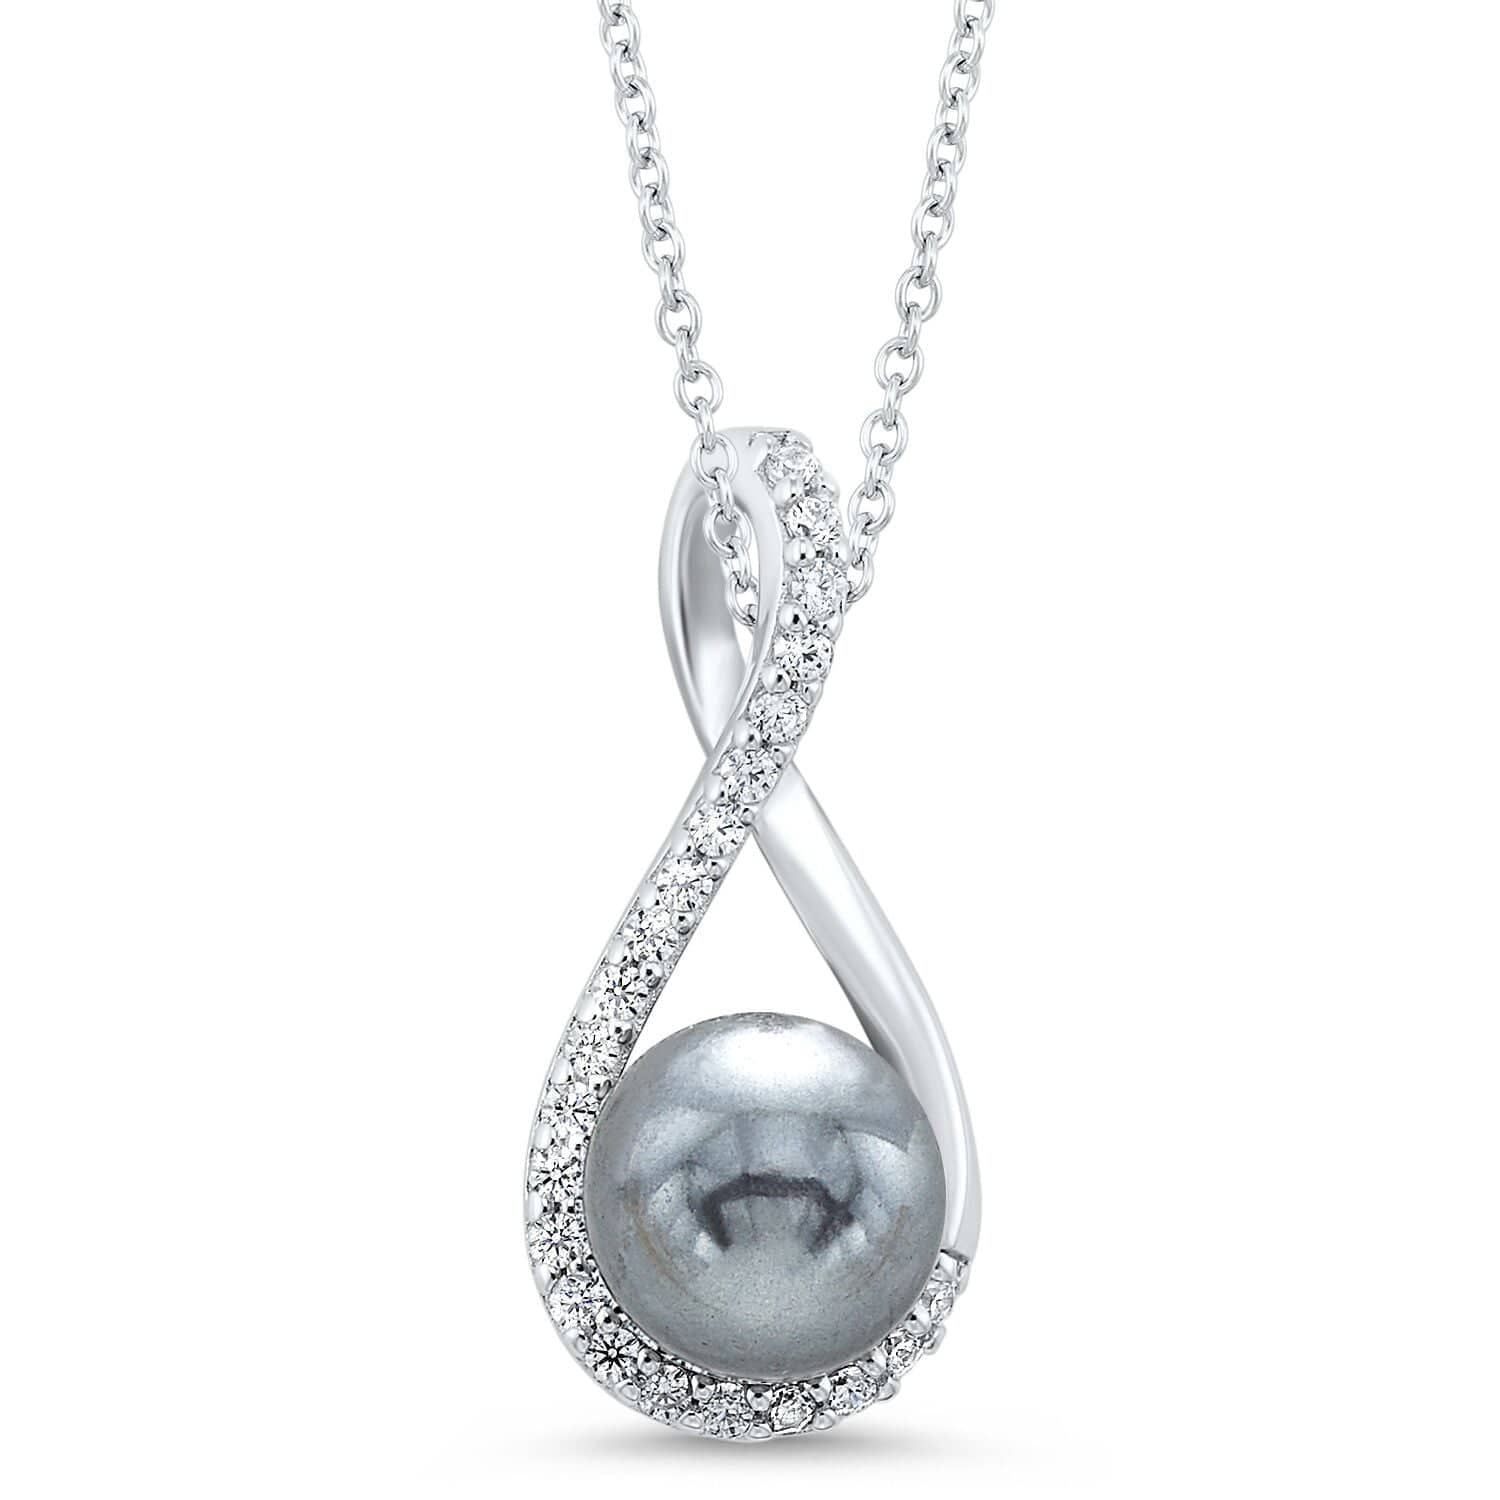 BW James Jewelers Necklace Silver Pearl Pendant